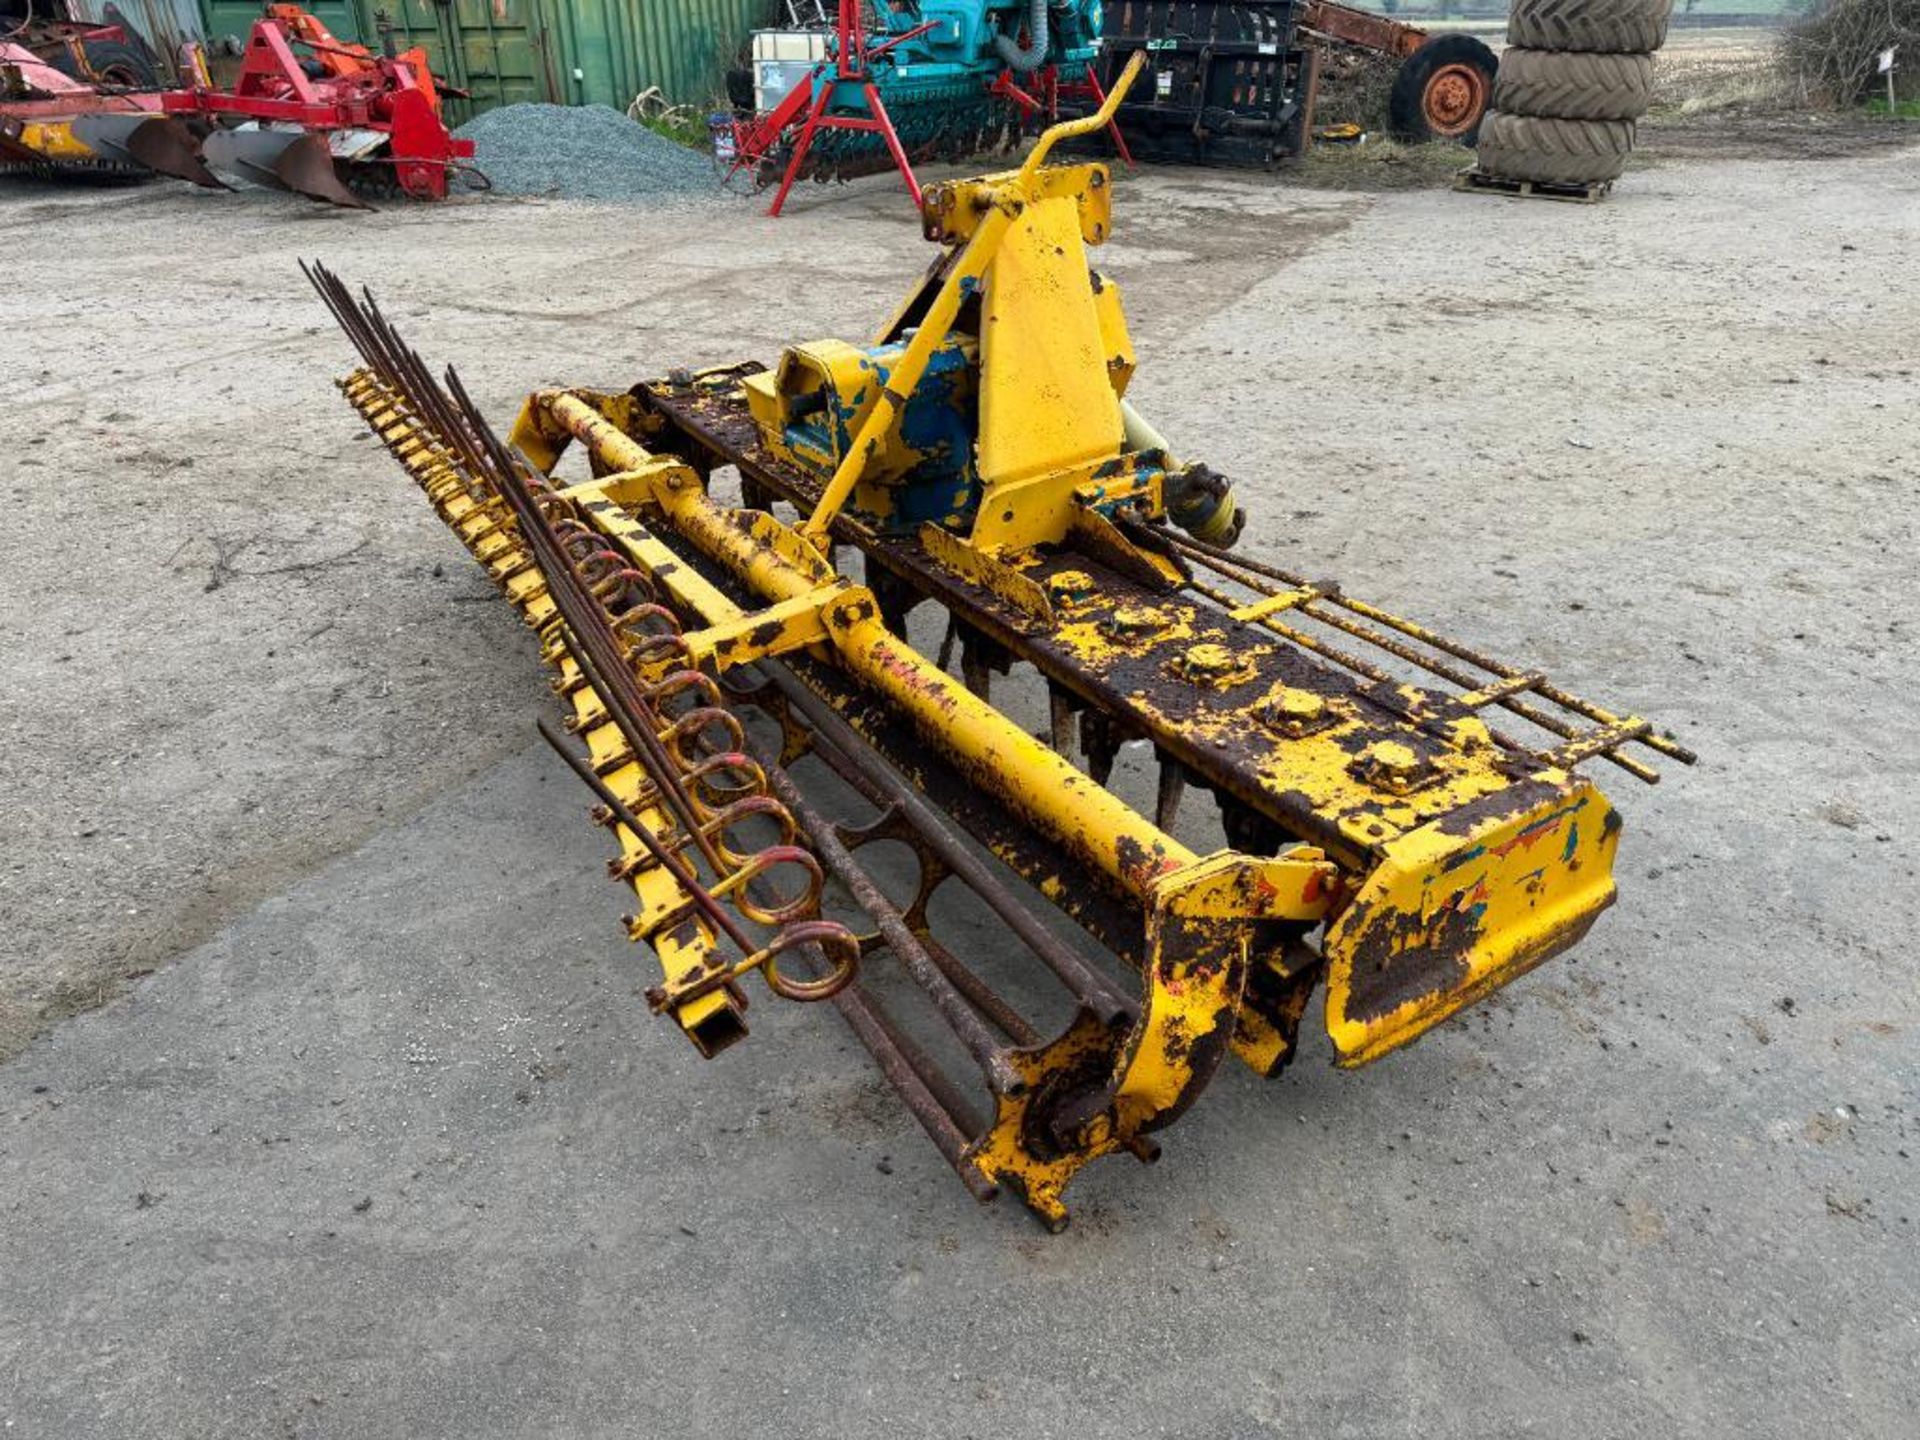 Falc 3m power harrow with rear crumbler roller, linkage mounted - Image 6 of 9